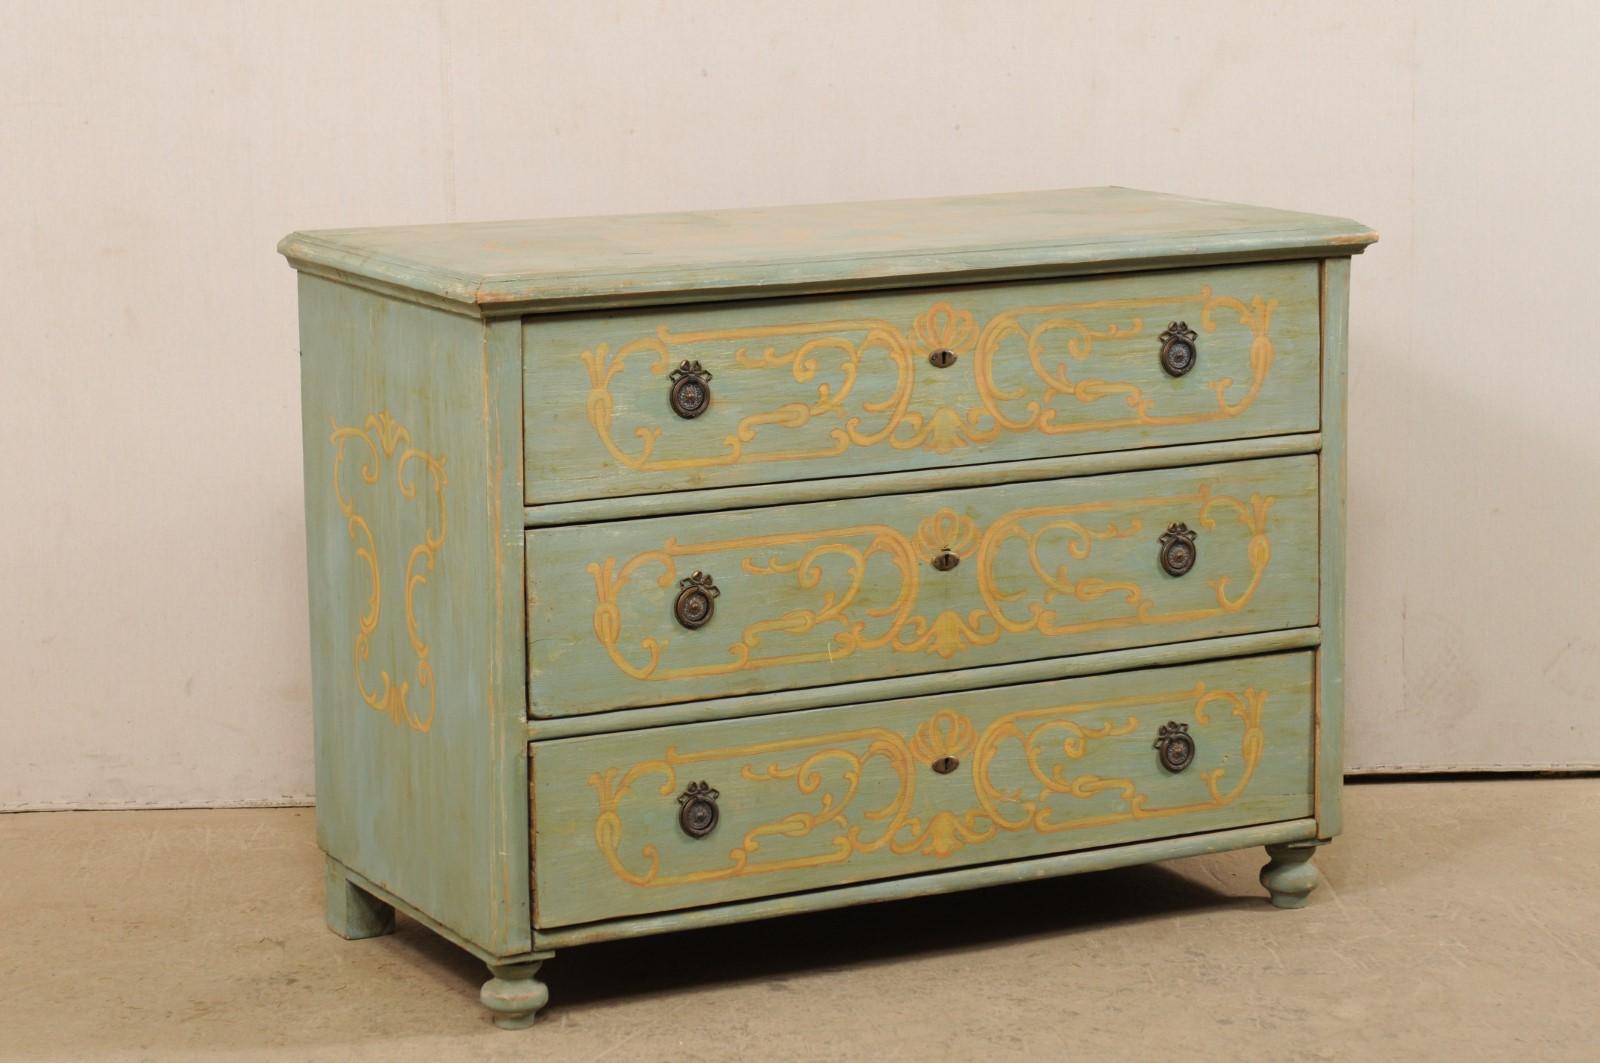 A European hand painted wood chest from the turn of the century, (late 19th-early 20th century). This antique chest from Europe features a rectangular-shaped top with beveled edges, atop a case housing three dovetailed-drawers, and raised upon